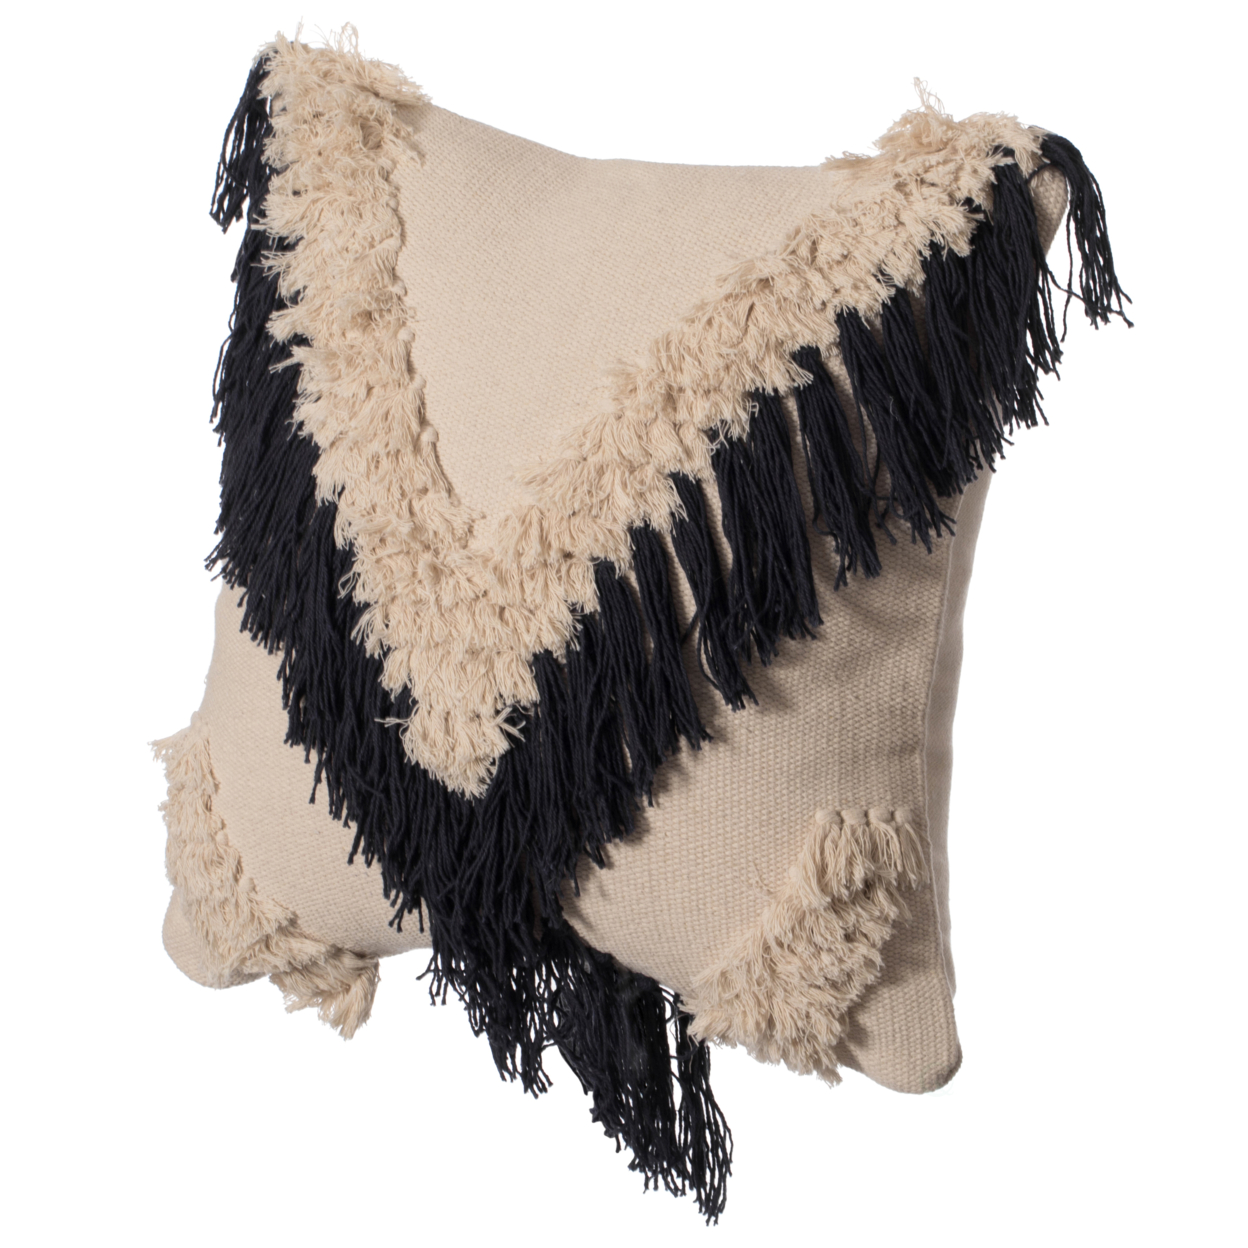 16 Handwoven Cotton Throw Pillow Cover With Embossed And Fringed Crossed Line - Charcoal